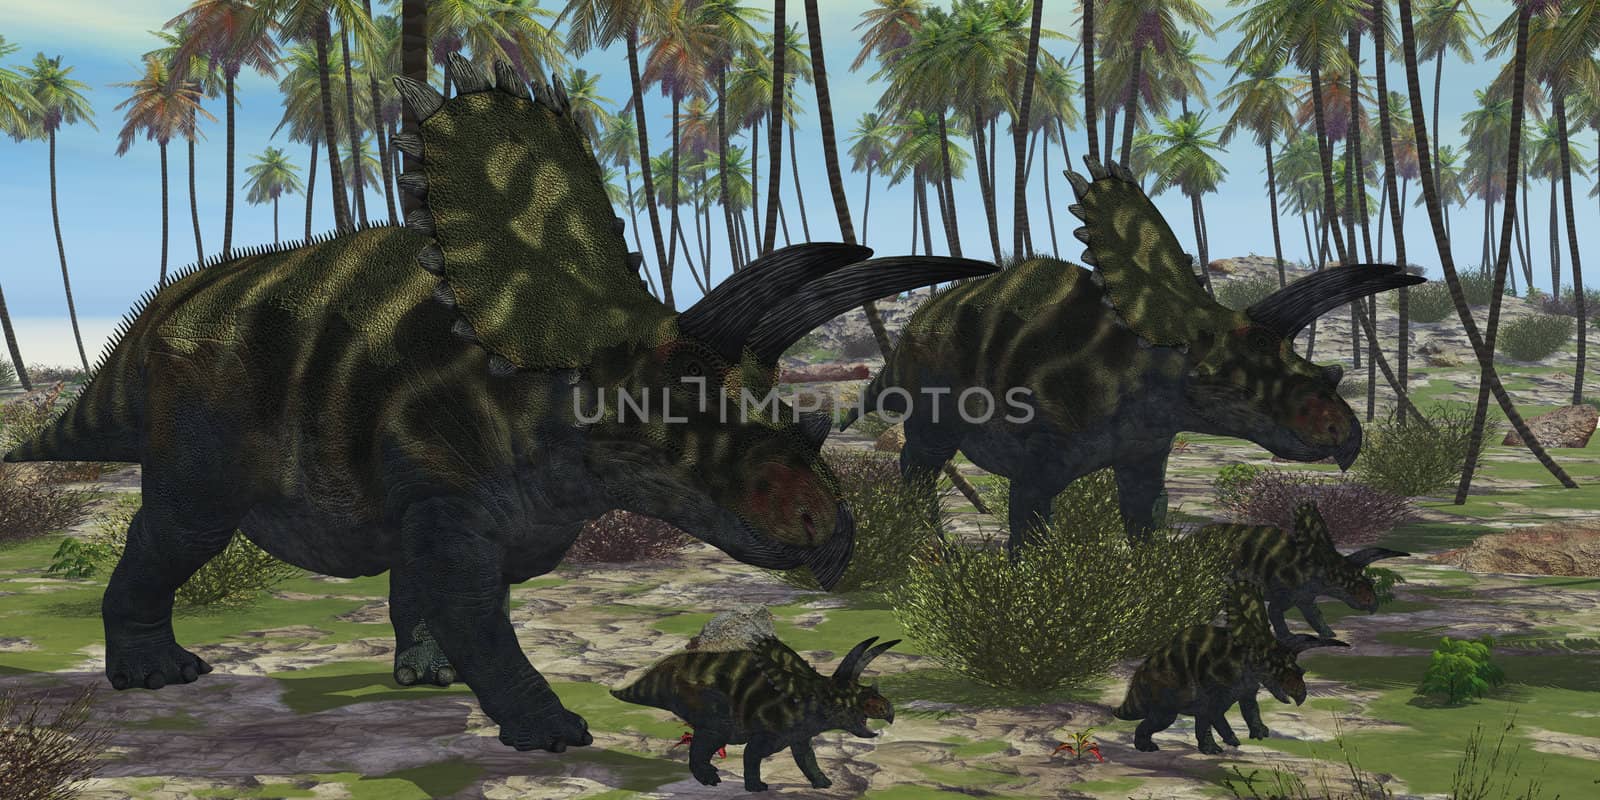 Two mother Coahuilaceratops dinosaurs escort their baby hatchlings among the palm trees of prehistoric times.